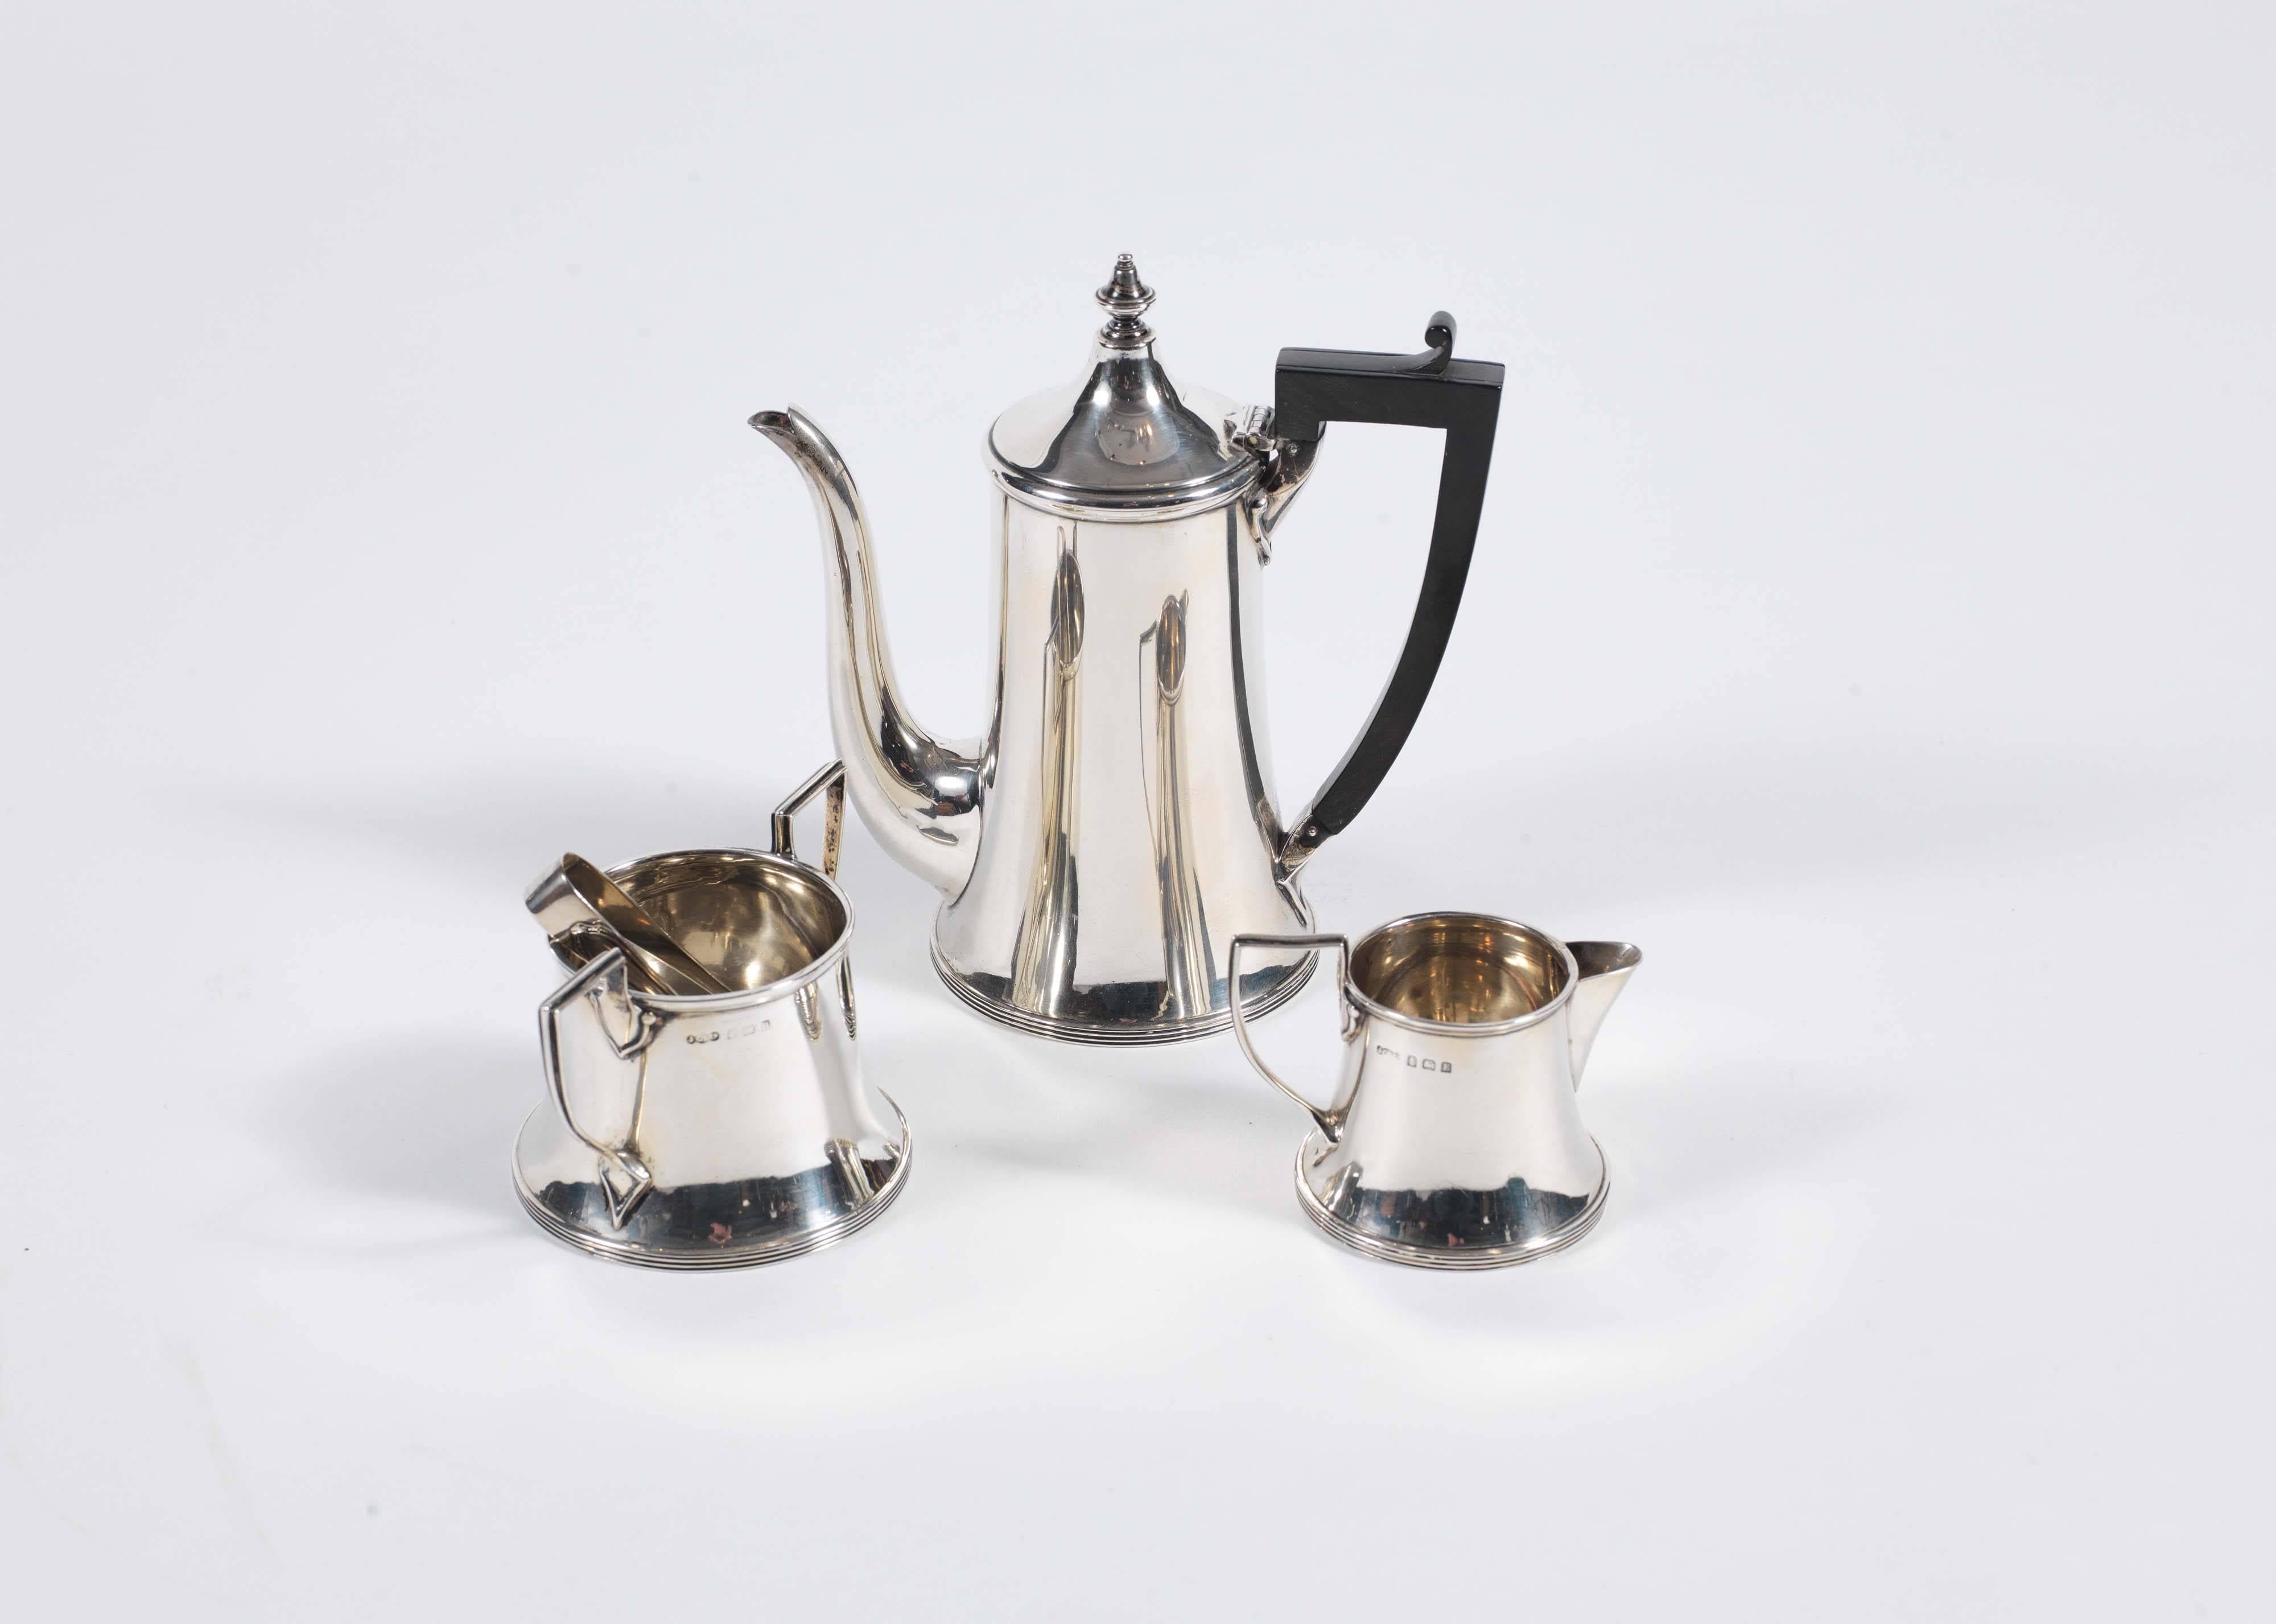 Extremely elegant, the coffee pot and sugar bowl hallmarked for Birmingham, silver, 1926 by J Collyer Ltd., the jug 1929. In the classical style and of fabulous scale.